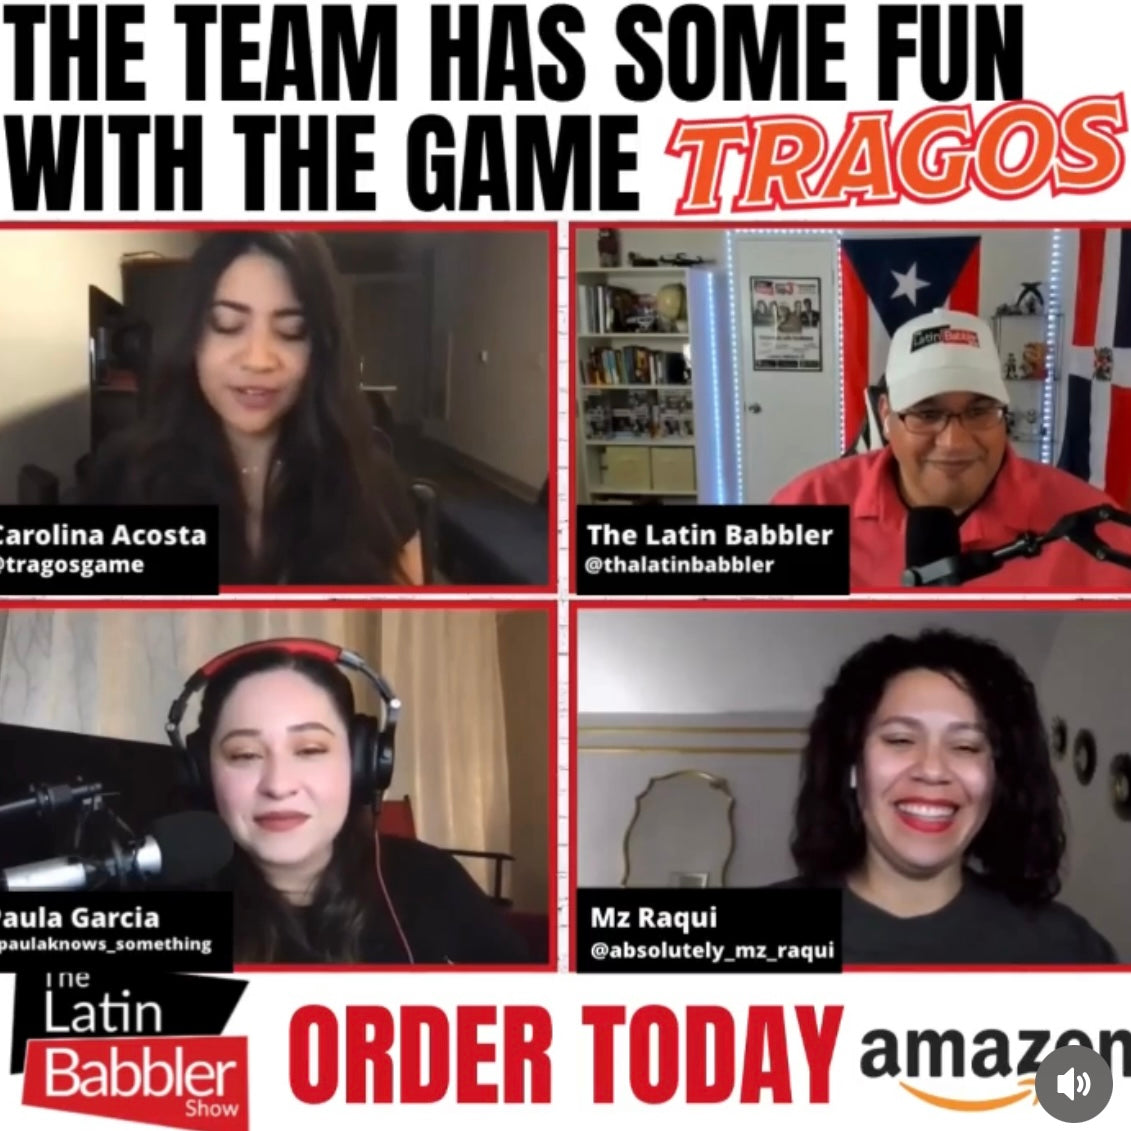 thumbnail screenshot of a game night and interview hosted by The Latin Babbler, Rafael Fernandez